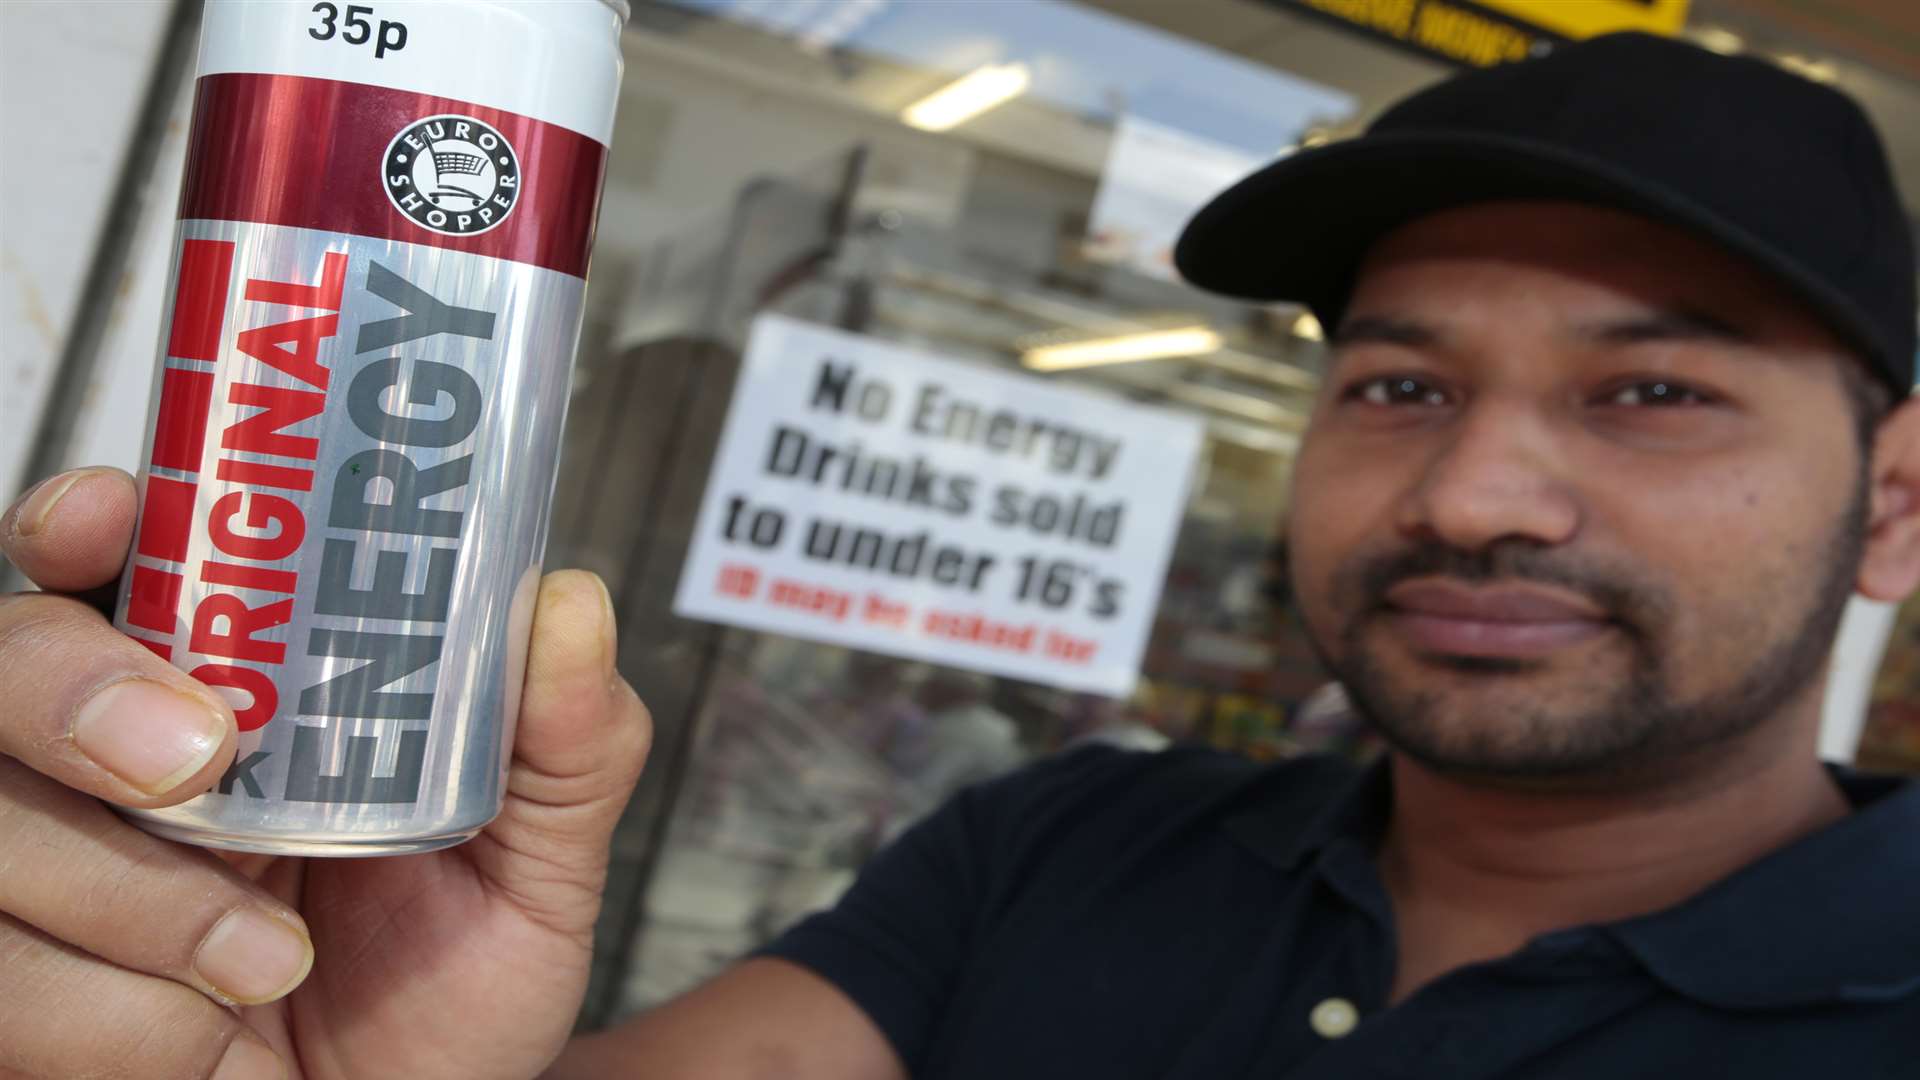 Newsagent manager Jahangir Alam by the sign he has put up about not selling energy drinks to under 16s